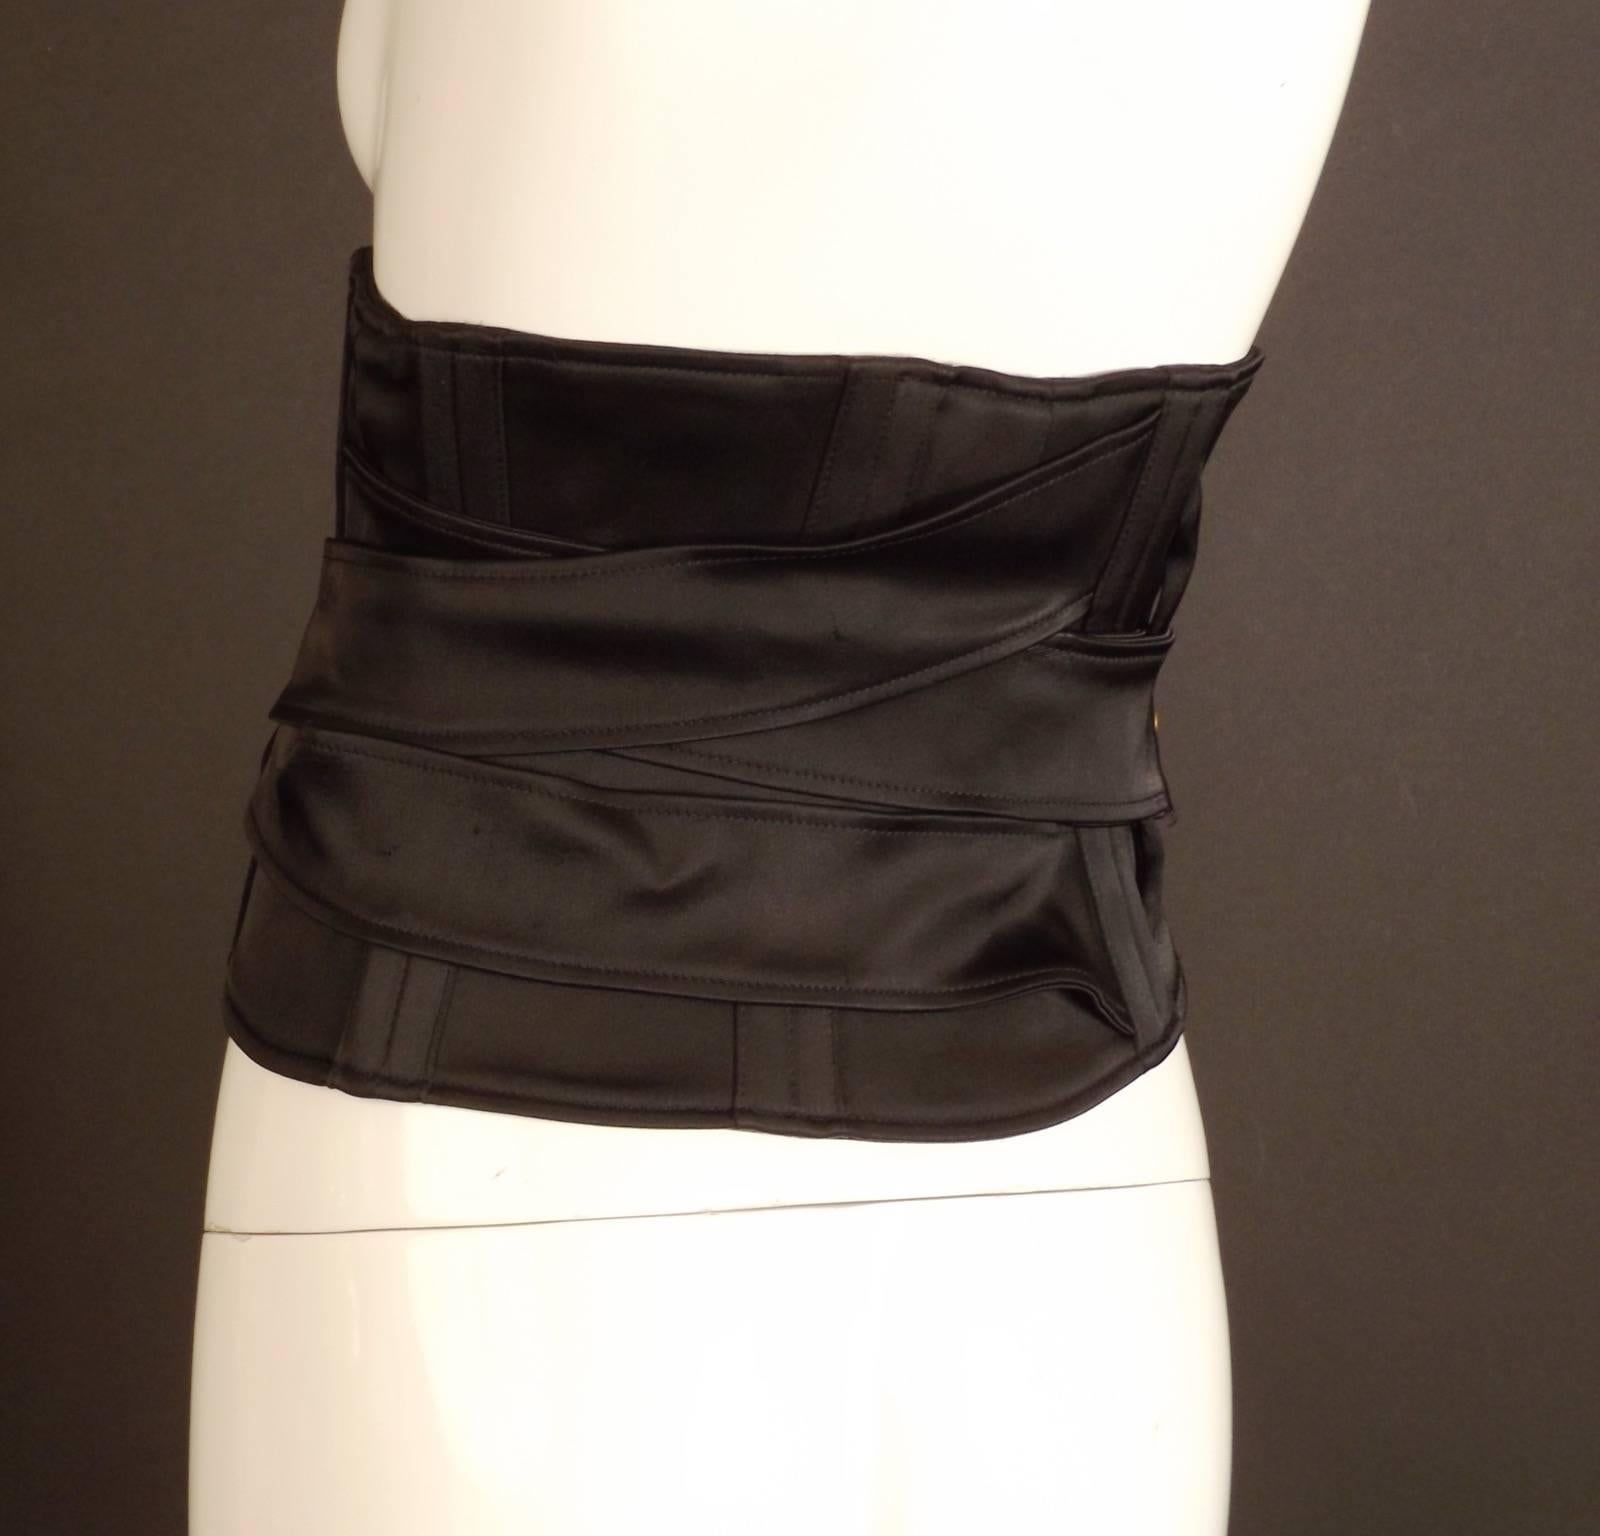 Fall, 2003 Runway Collection. This girdle belt is in black cotton/rayon satin. It is dart fitted to the waist with boning across the back and criss cross double straps that buckle at the center front. Velcro closure down the front. Fully lined.